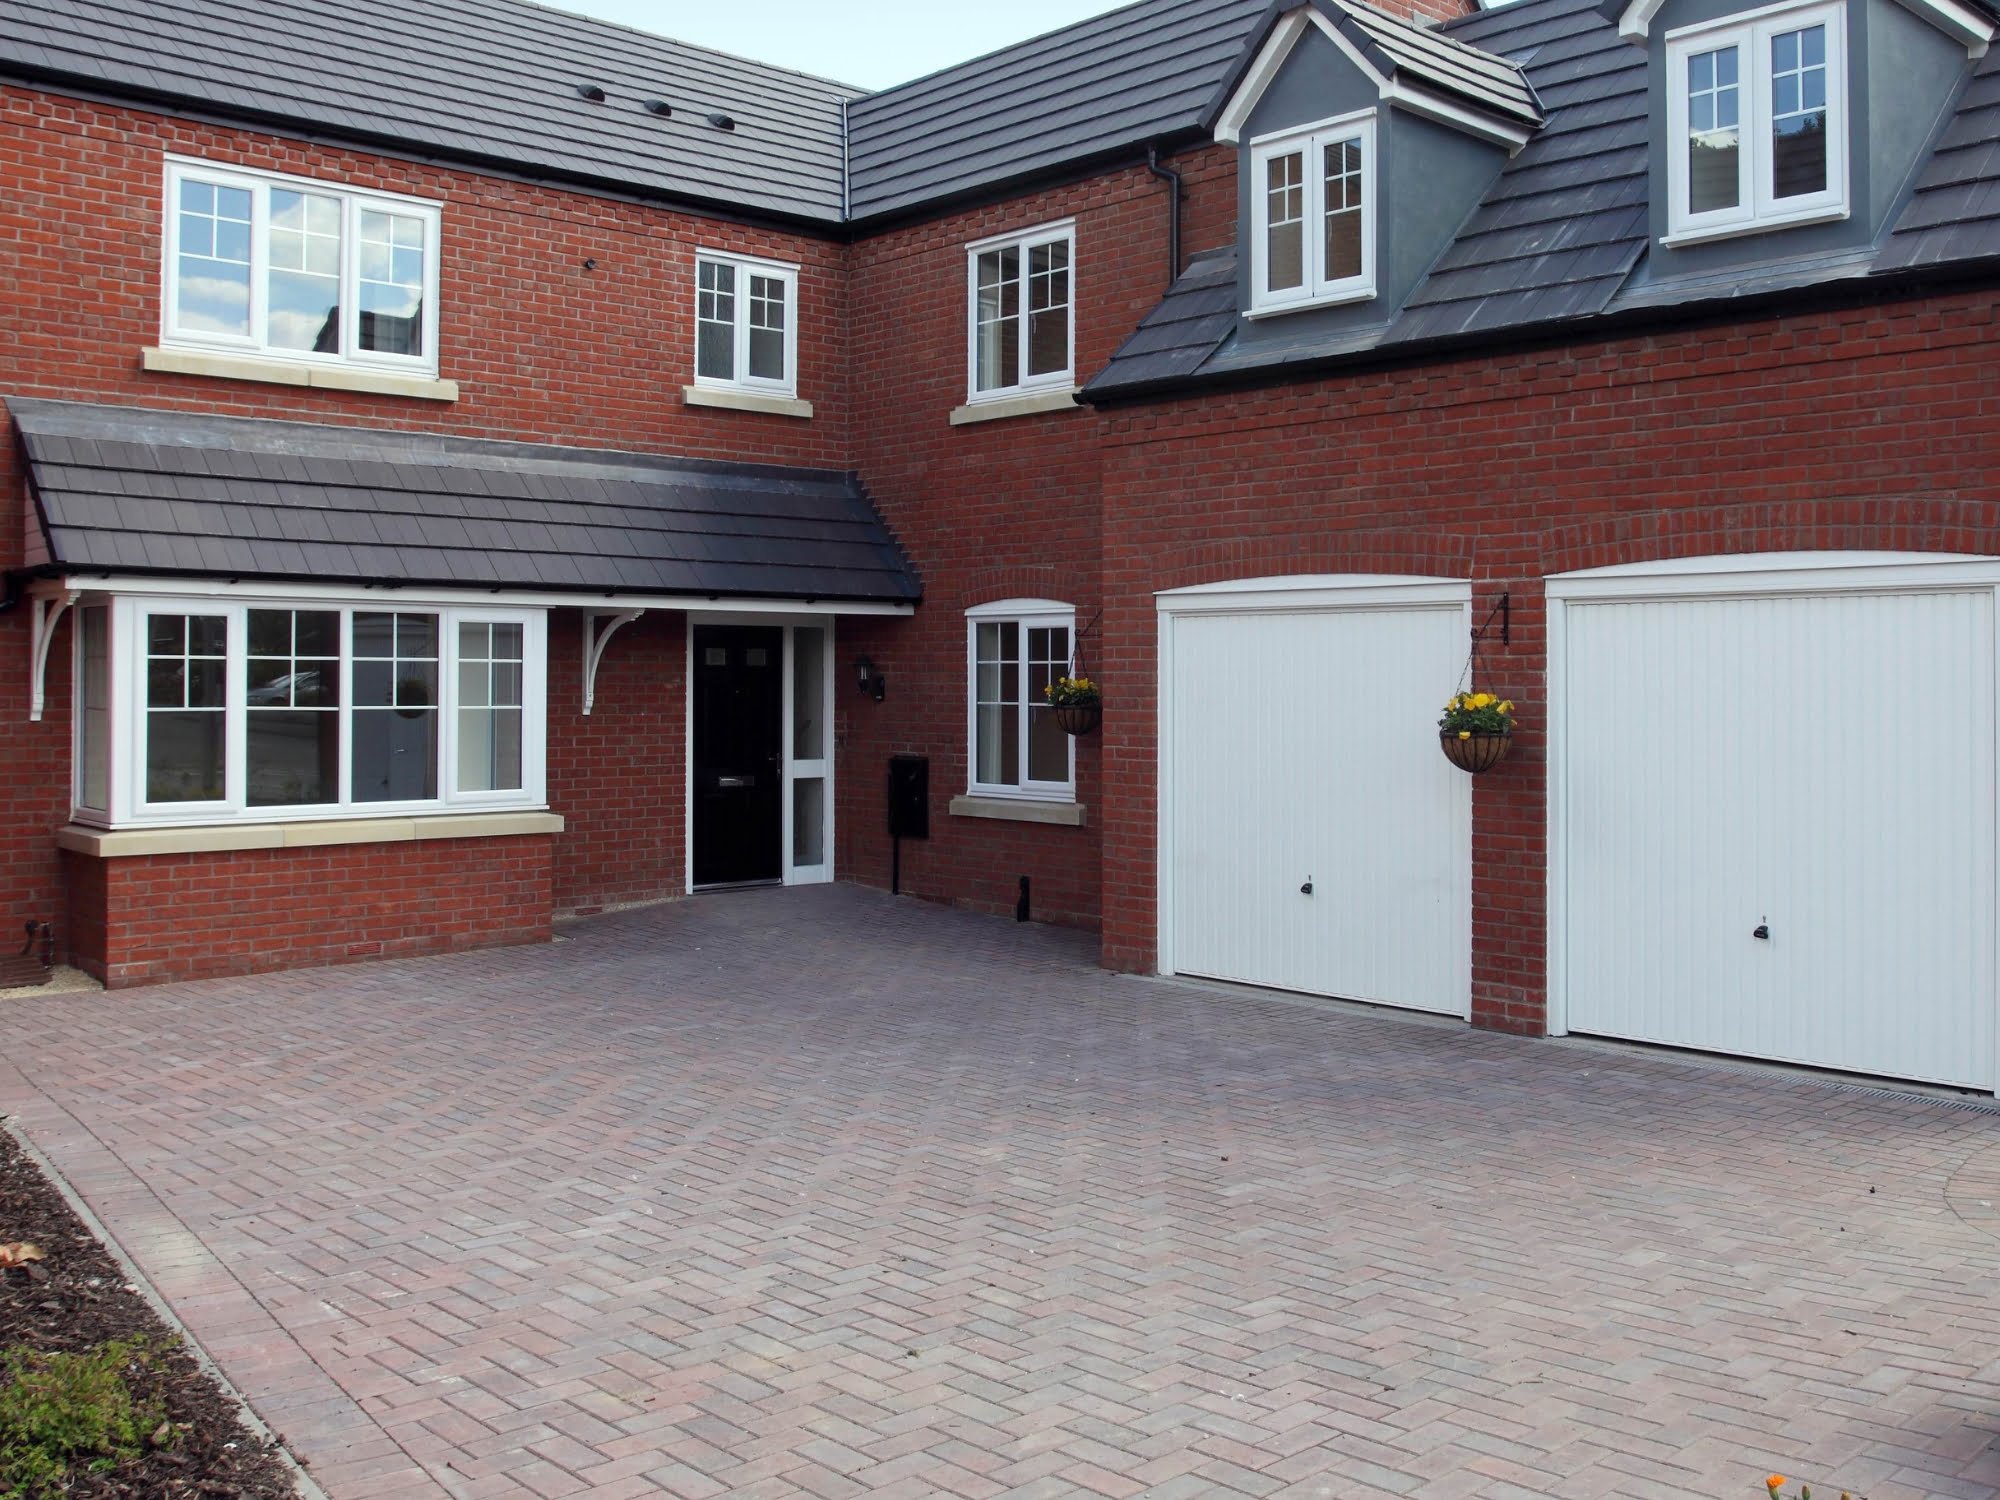 An image of a detached house with a large driveway